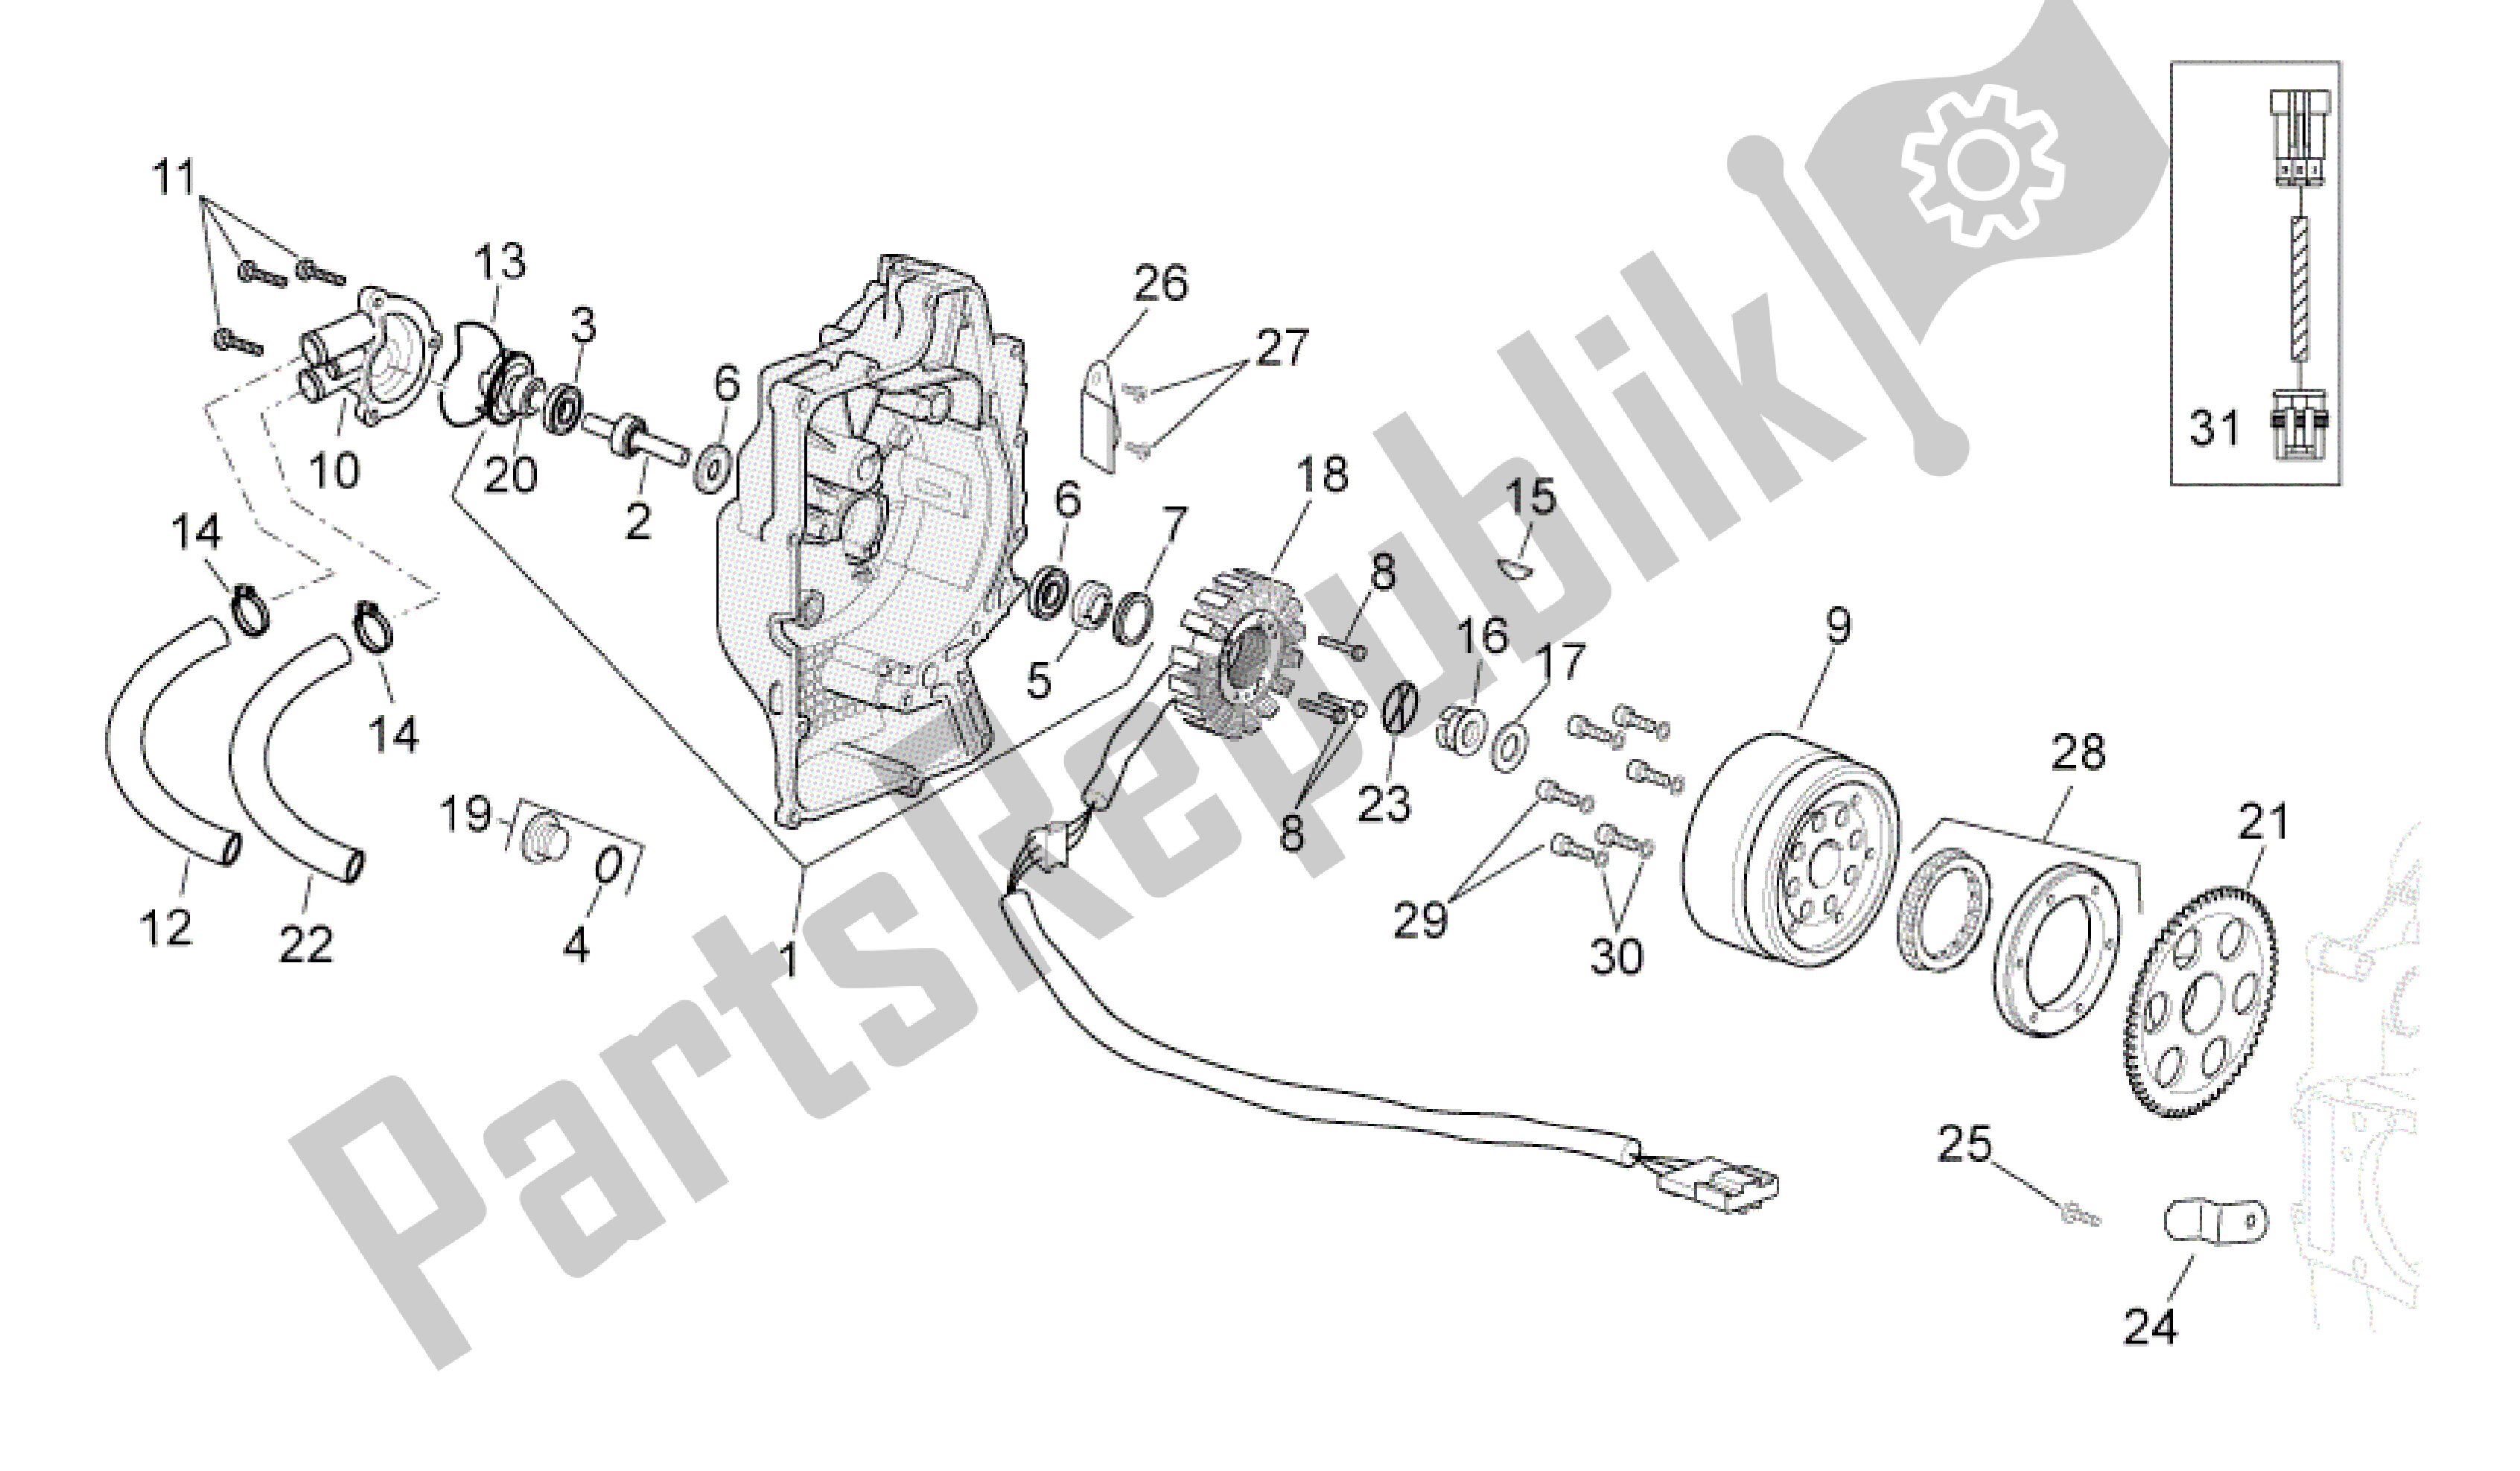 All parts for the Ignition Unit of the Aprilia Sport City 300 2008 - 2010